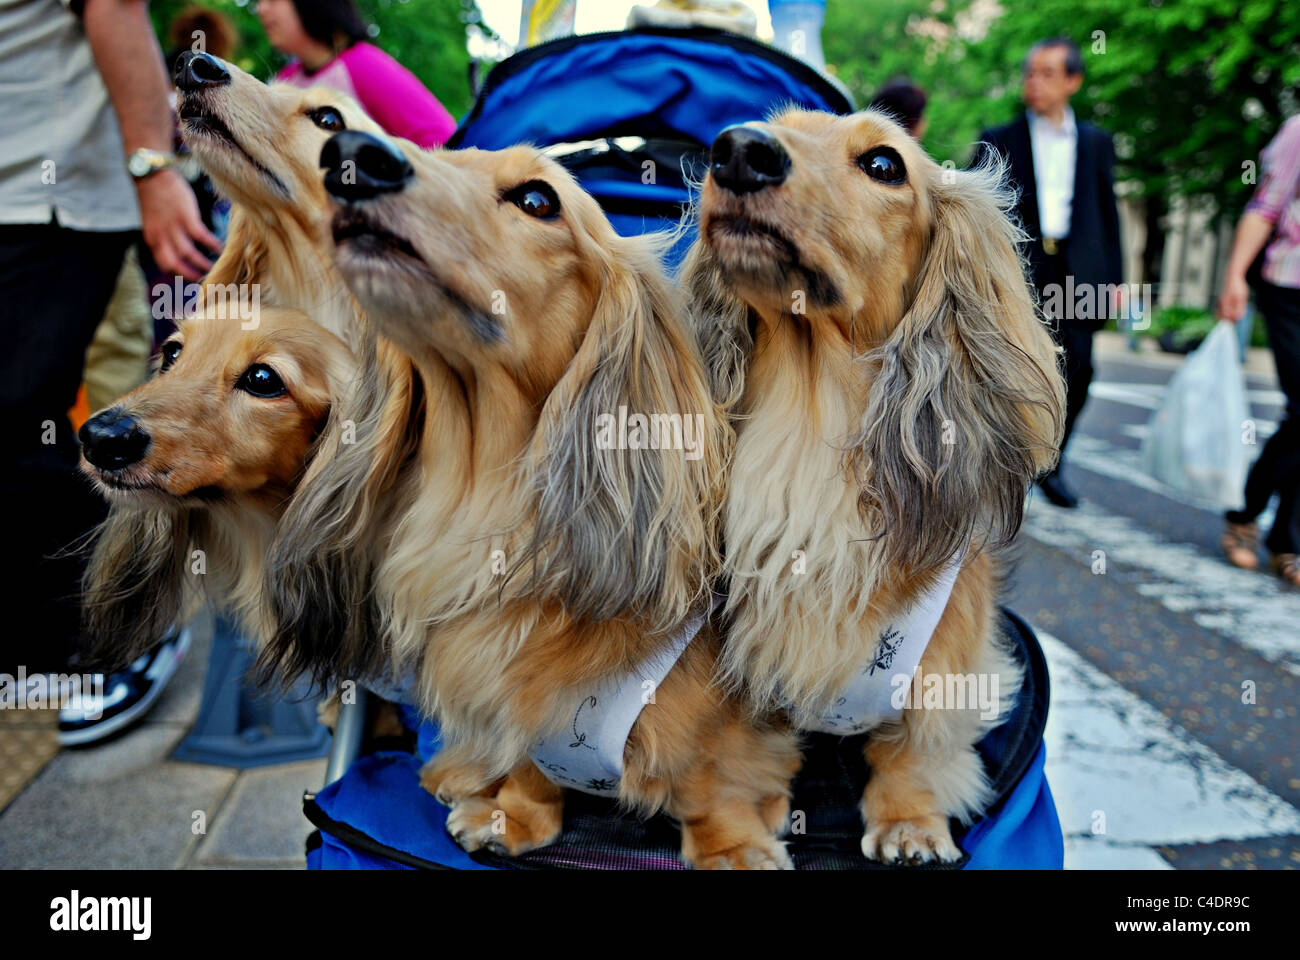 Four long-haired dachshund wearing clothes as they are driven around in a stroller in Japan Stock Photo